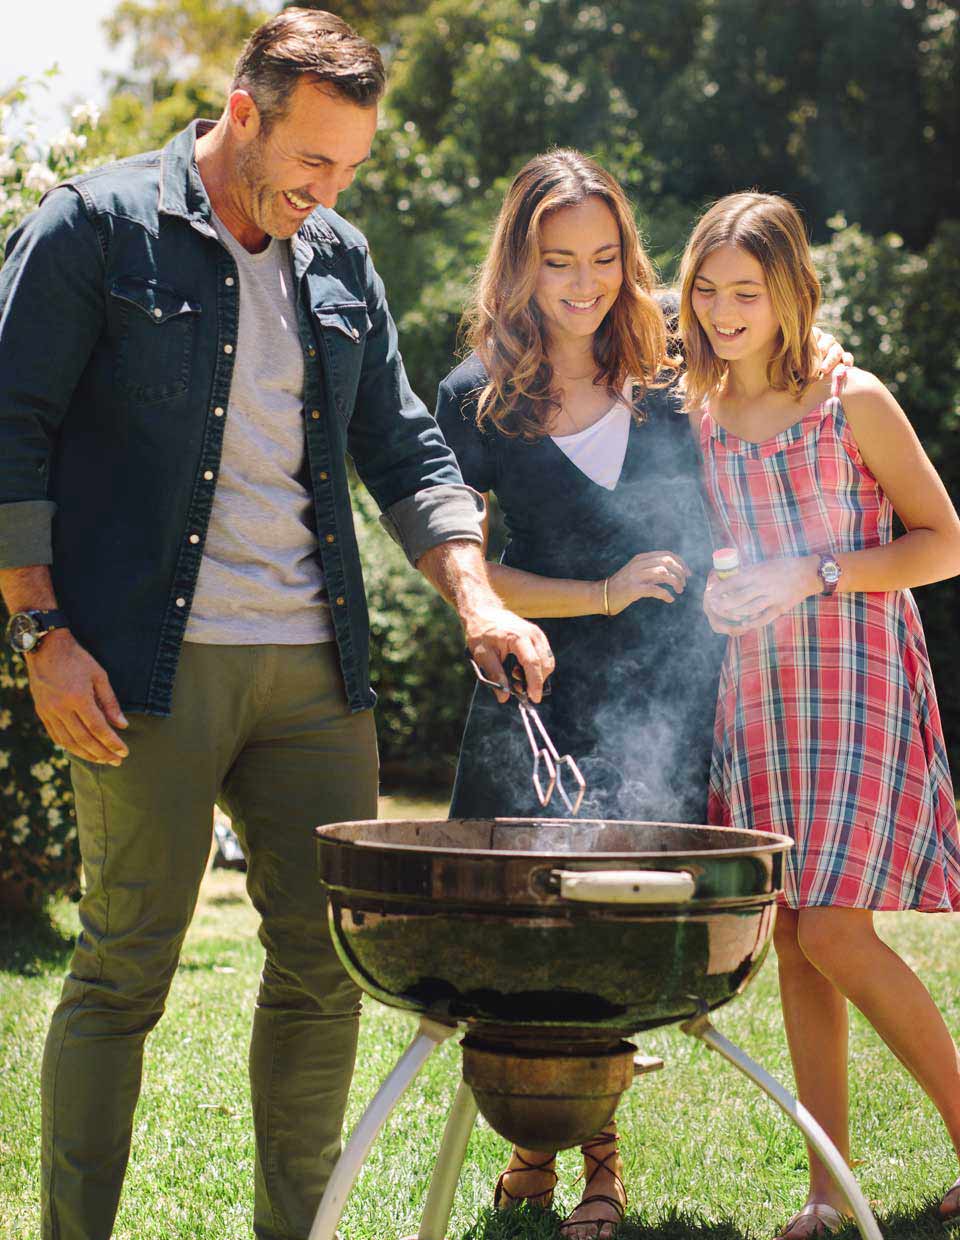 promo image for family barbequing in their backyard